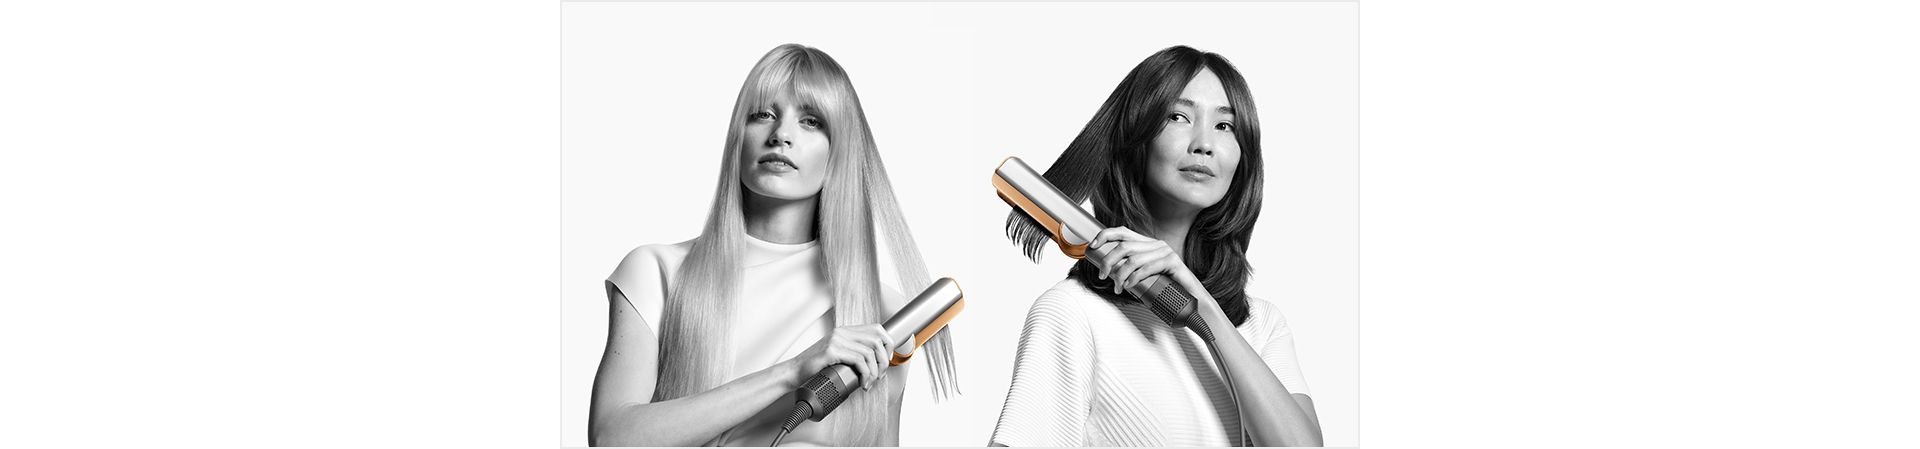 Two models using the Dyson Airstrait straightener.